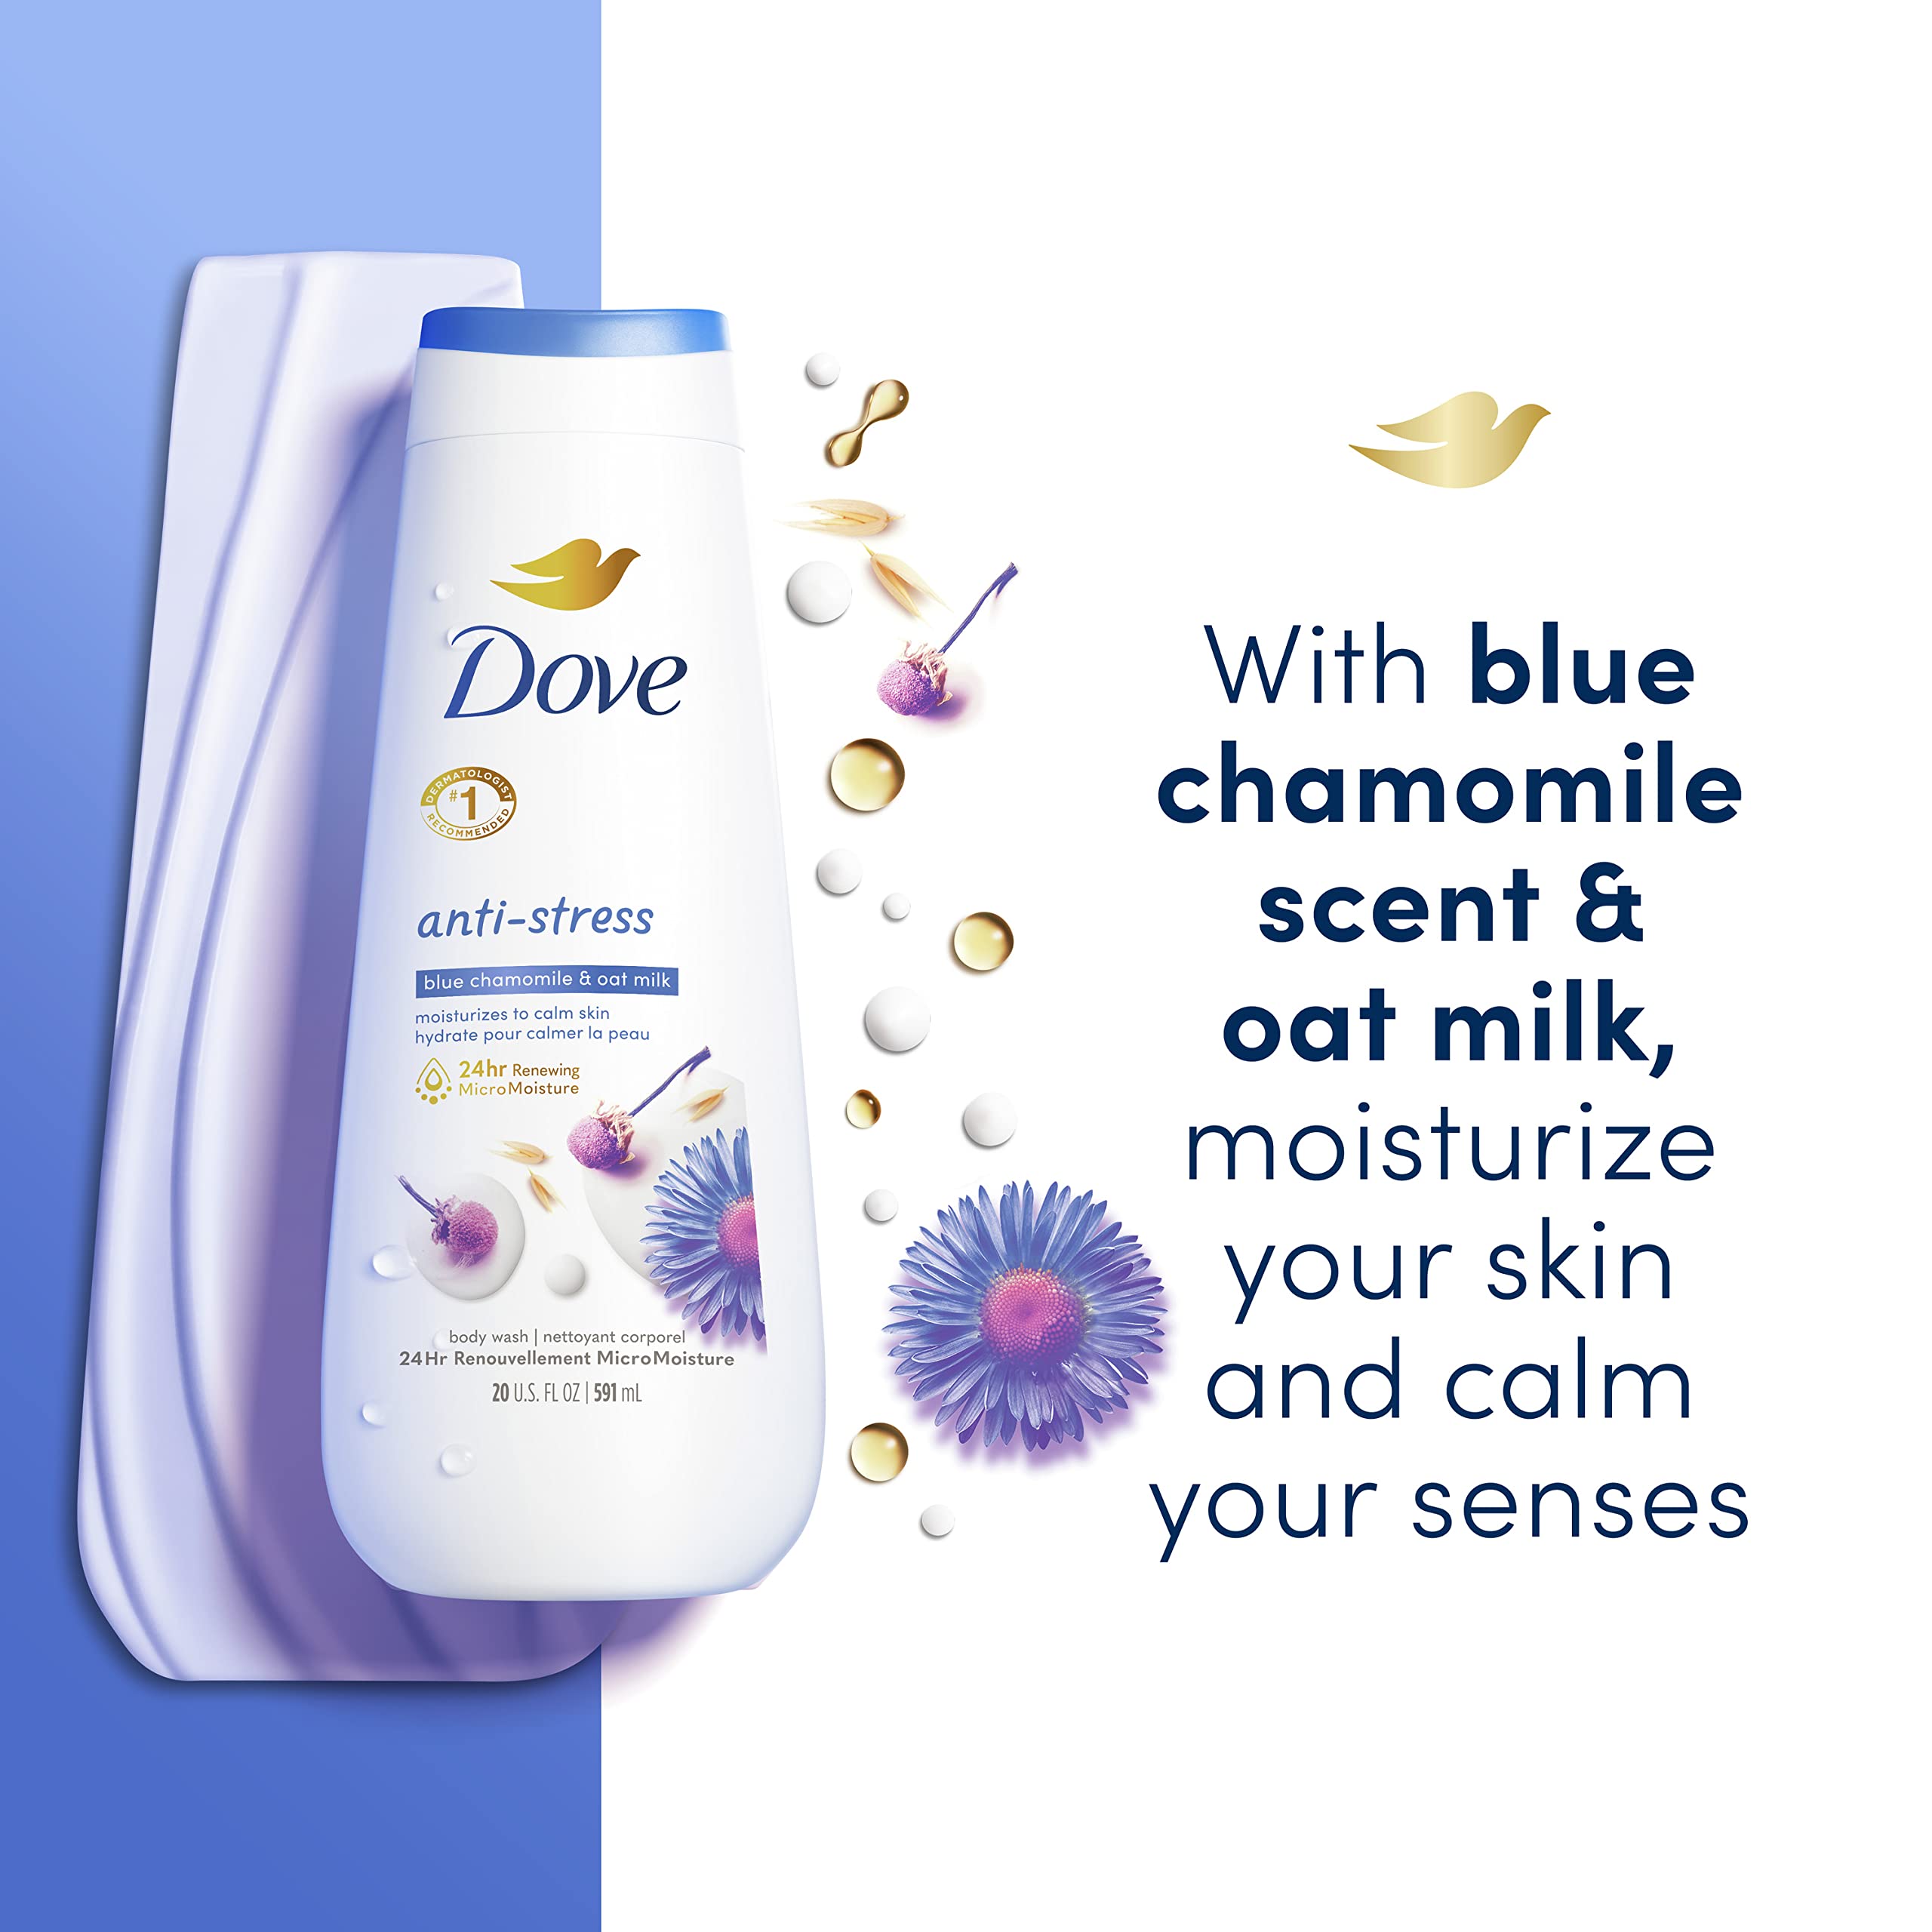 Dove Body Wash Anti-Stress Blue Chamomile & Oat Milk 4 Count for Renewed, Healthy-Looking Skin Moisturizing Gentle Skin Cleanser with 24hr Renewing MicroMoisture 20 oz